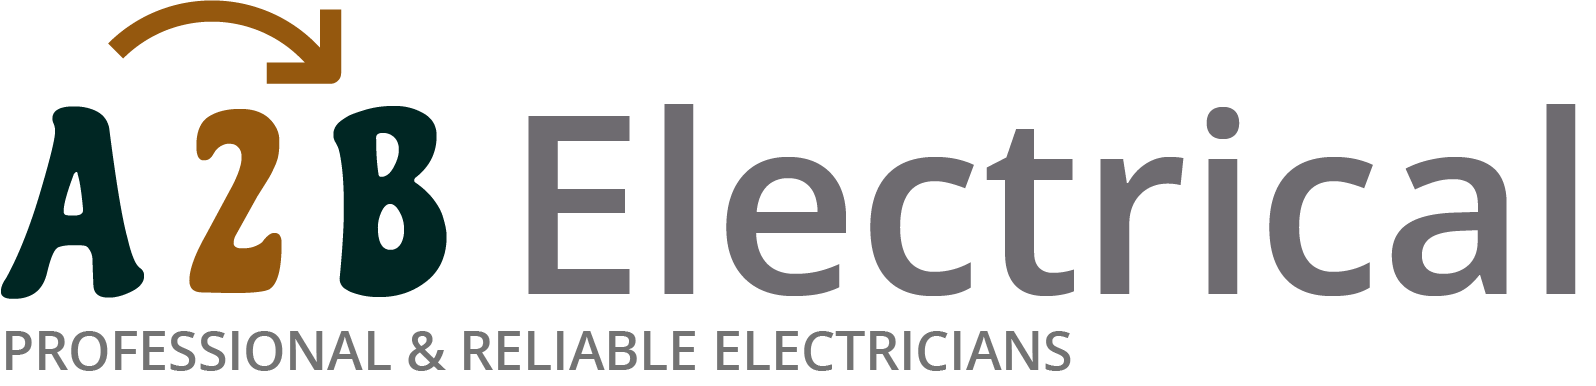 If you have electrical wiring problems in Brierley Hill, we can provide an electrician to have a look for you. 